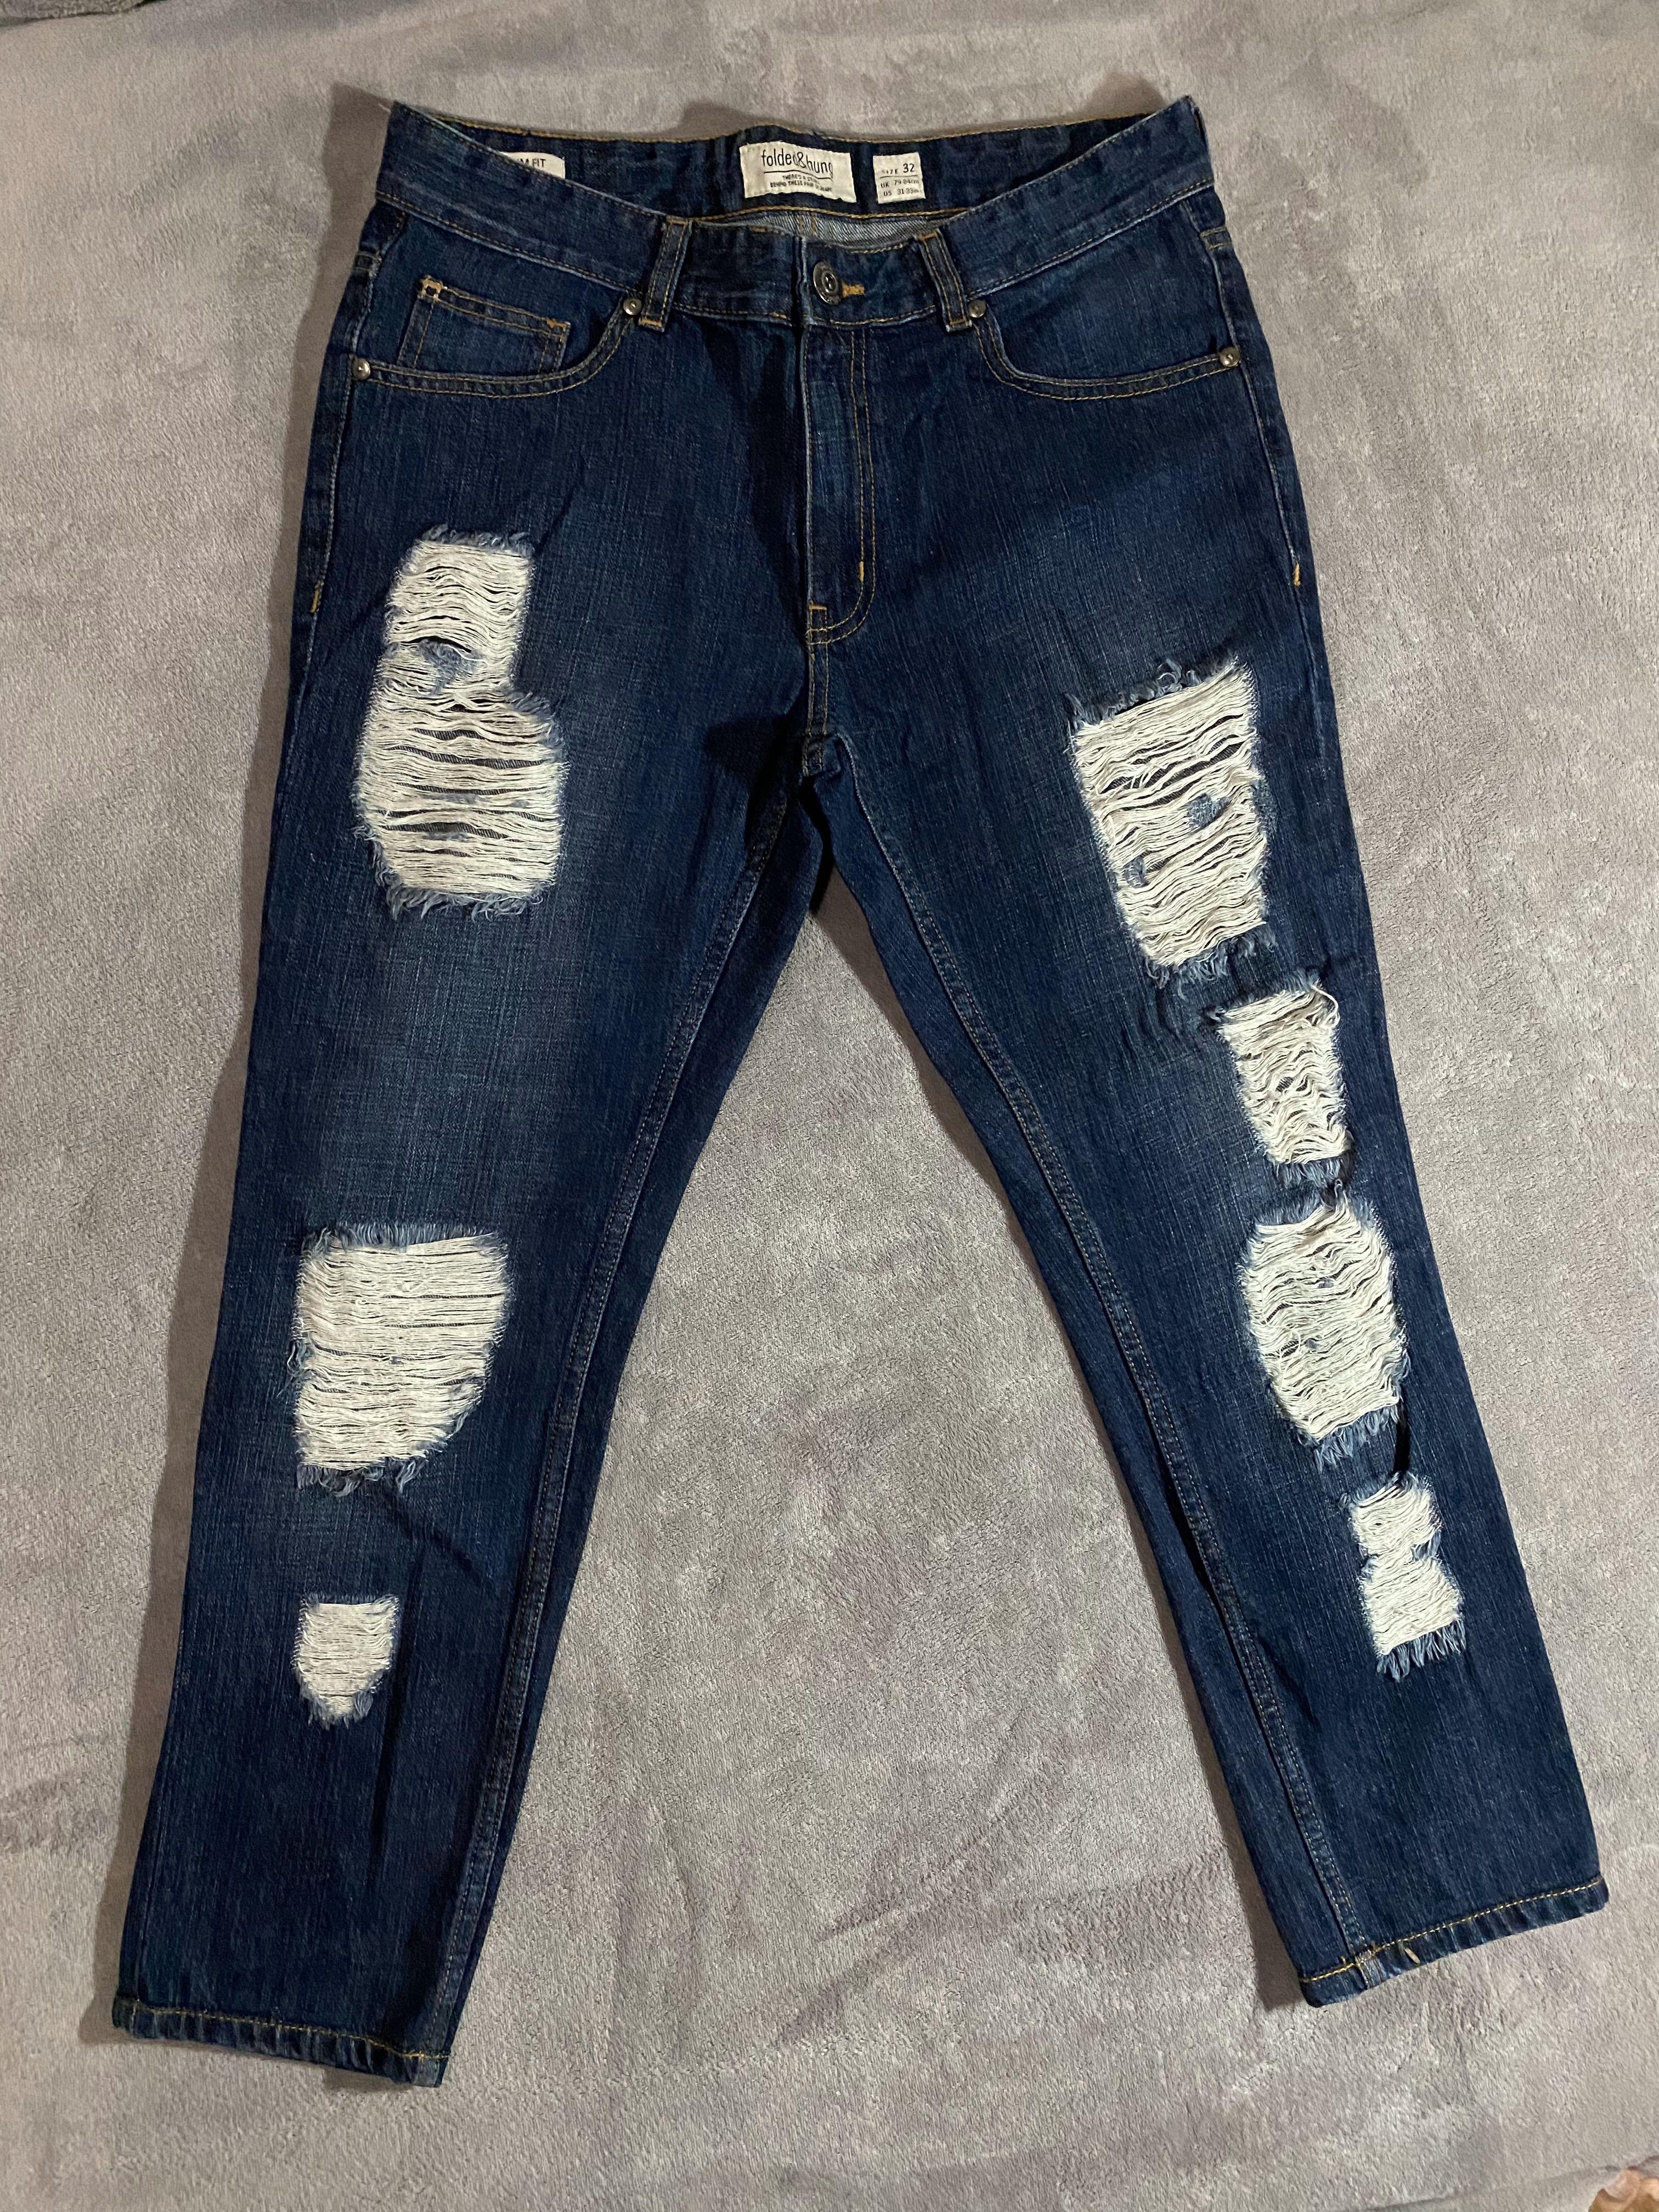 size 32 jeans in us